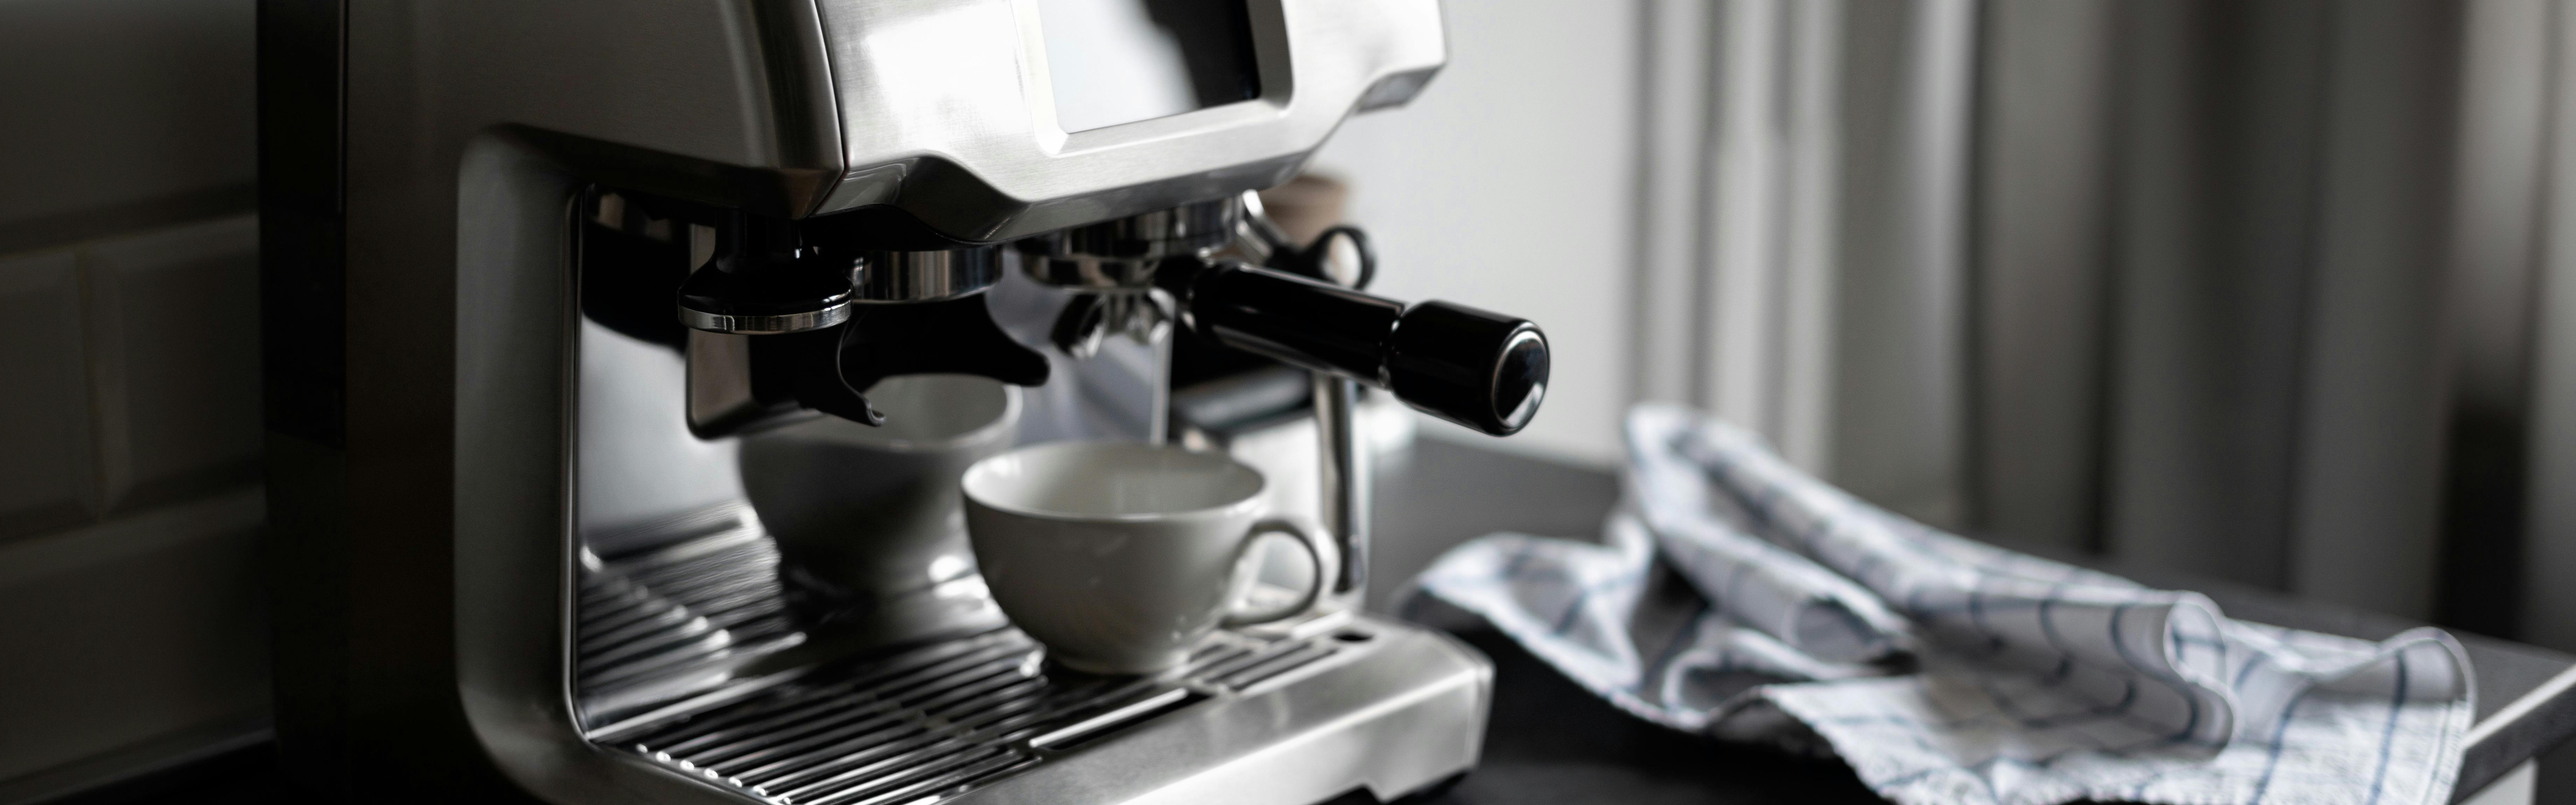 An Expert Guide to Rocket Espresso Machines